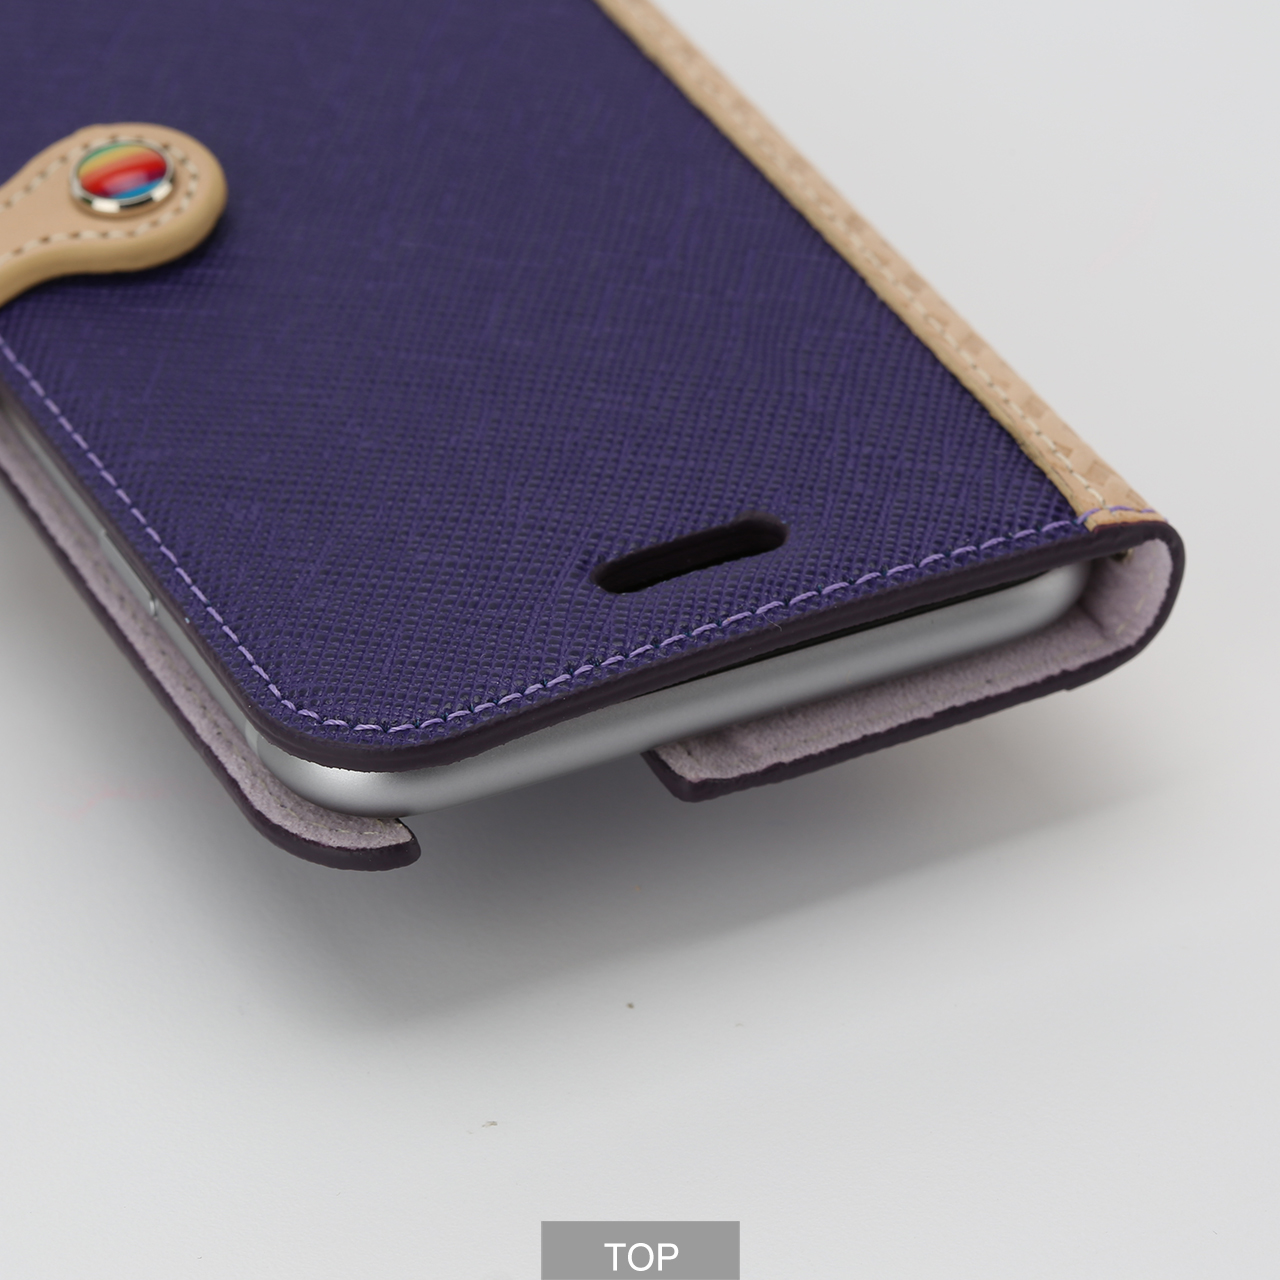 lims-saffiano-leather-slim-fit-edition-iphone-6-07.jpg